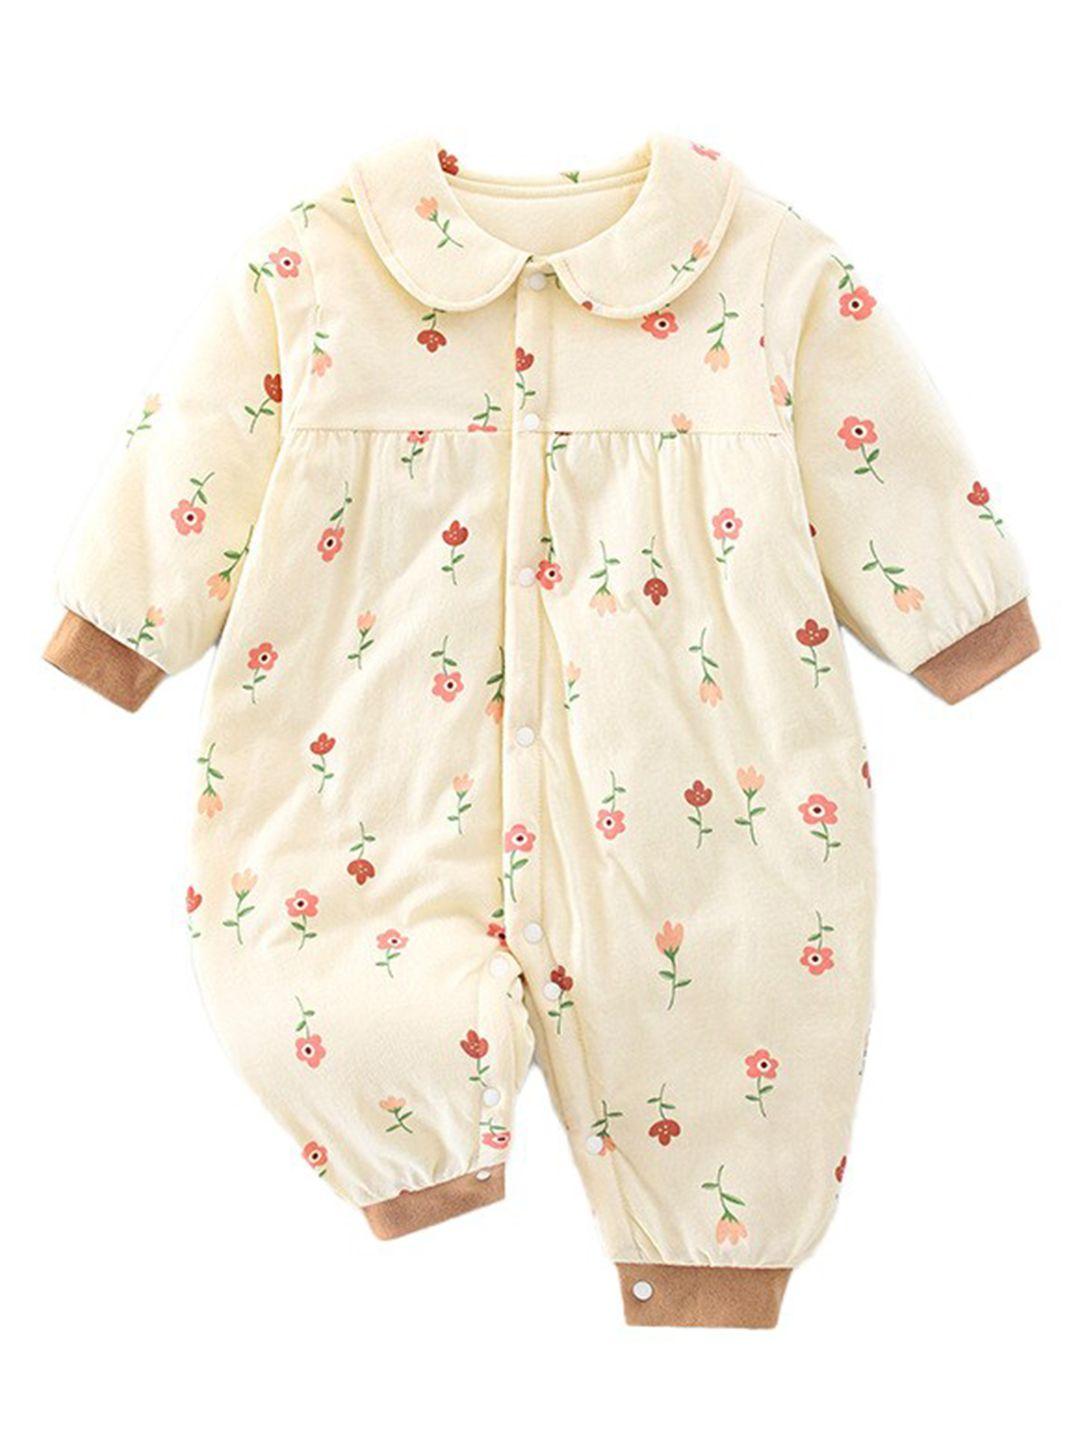 stylecast-infant-girls-beige-printed-cotton-rompers